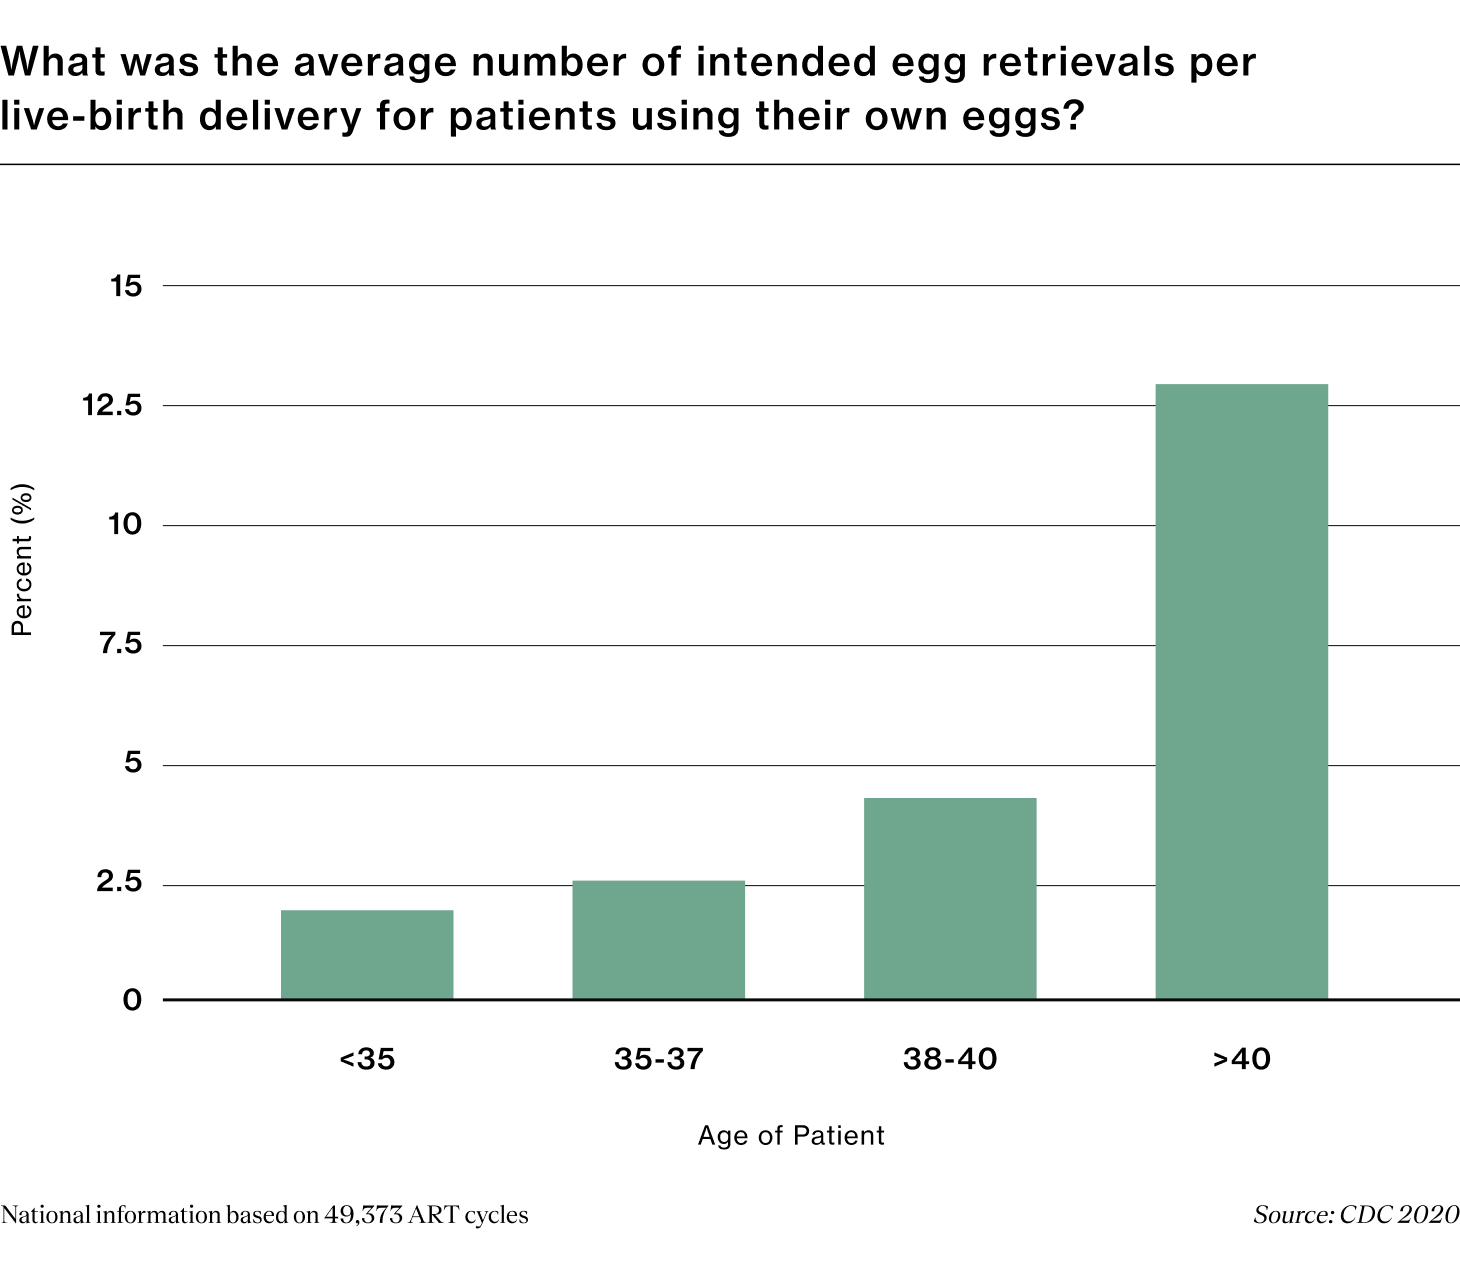 The number of intended egg retrievals per live-birth delivery for patients using their own eggs.